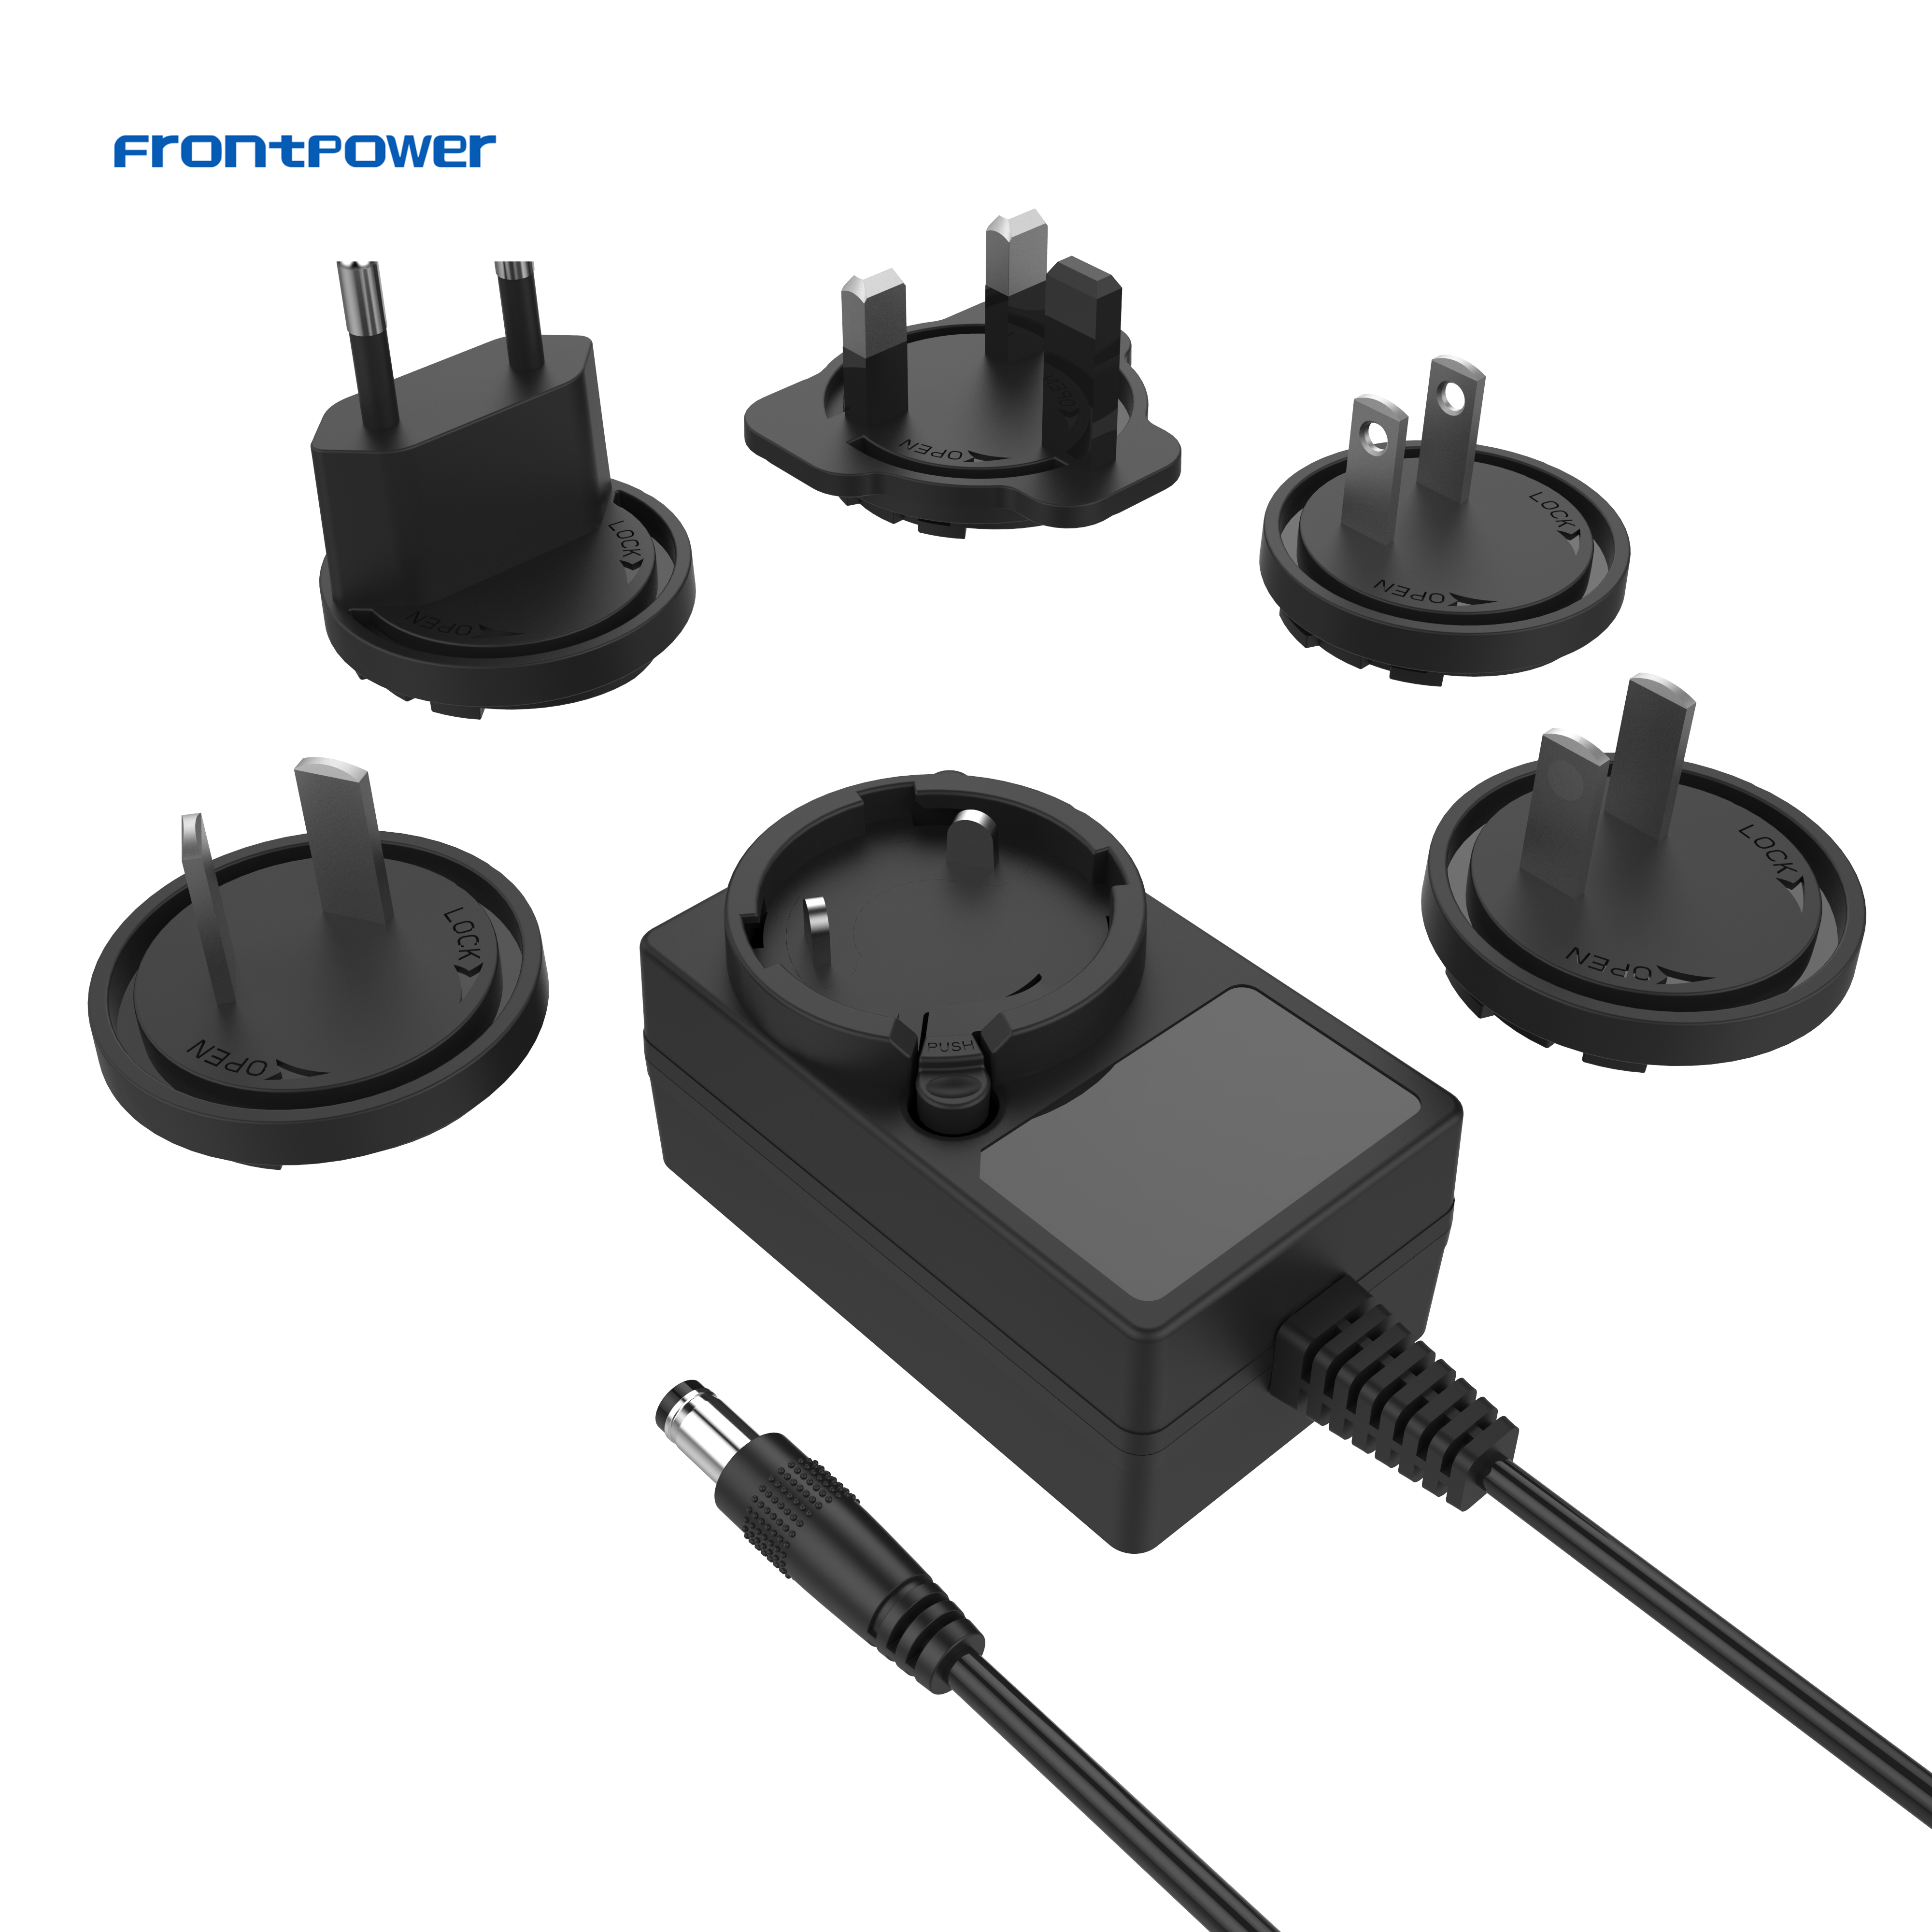 Frontpower power supply 12V 2A 24V 1A interchangeable plug adapter with UL/ CE/FCC/GS/SAA/RCM/CCC/PSE for Player